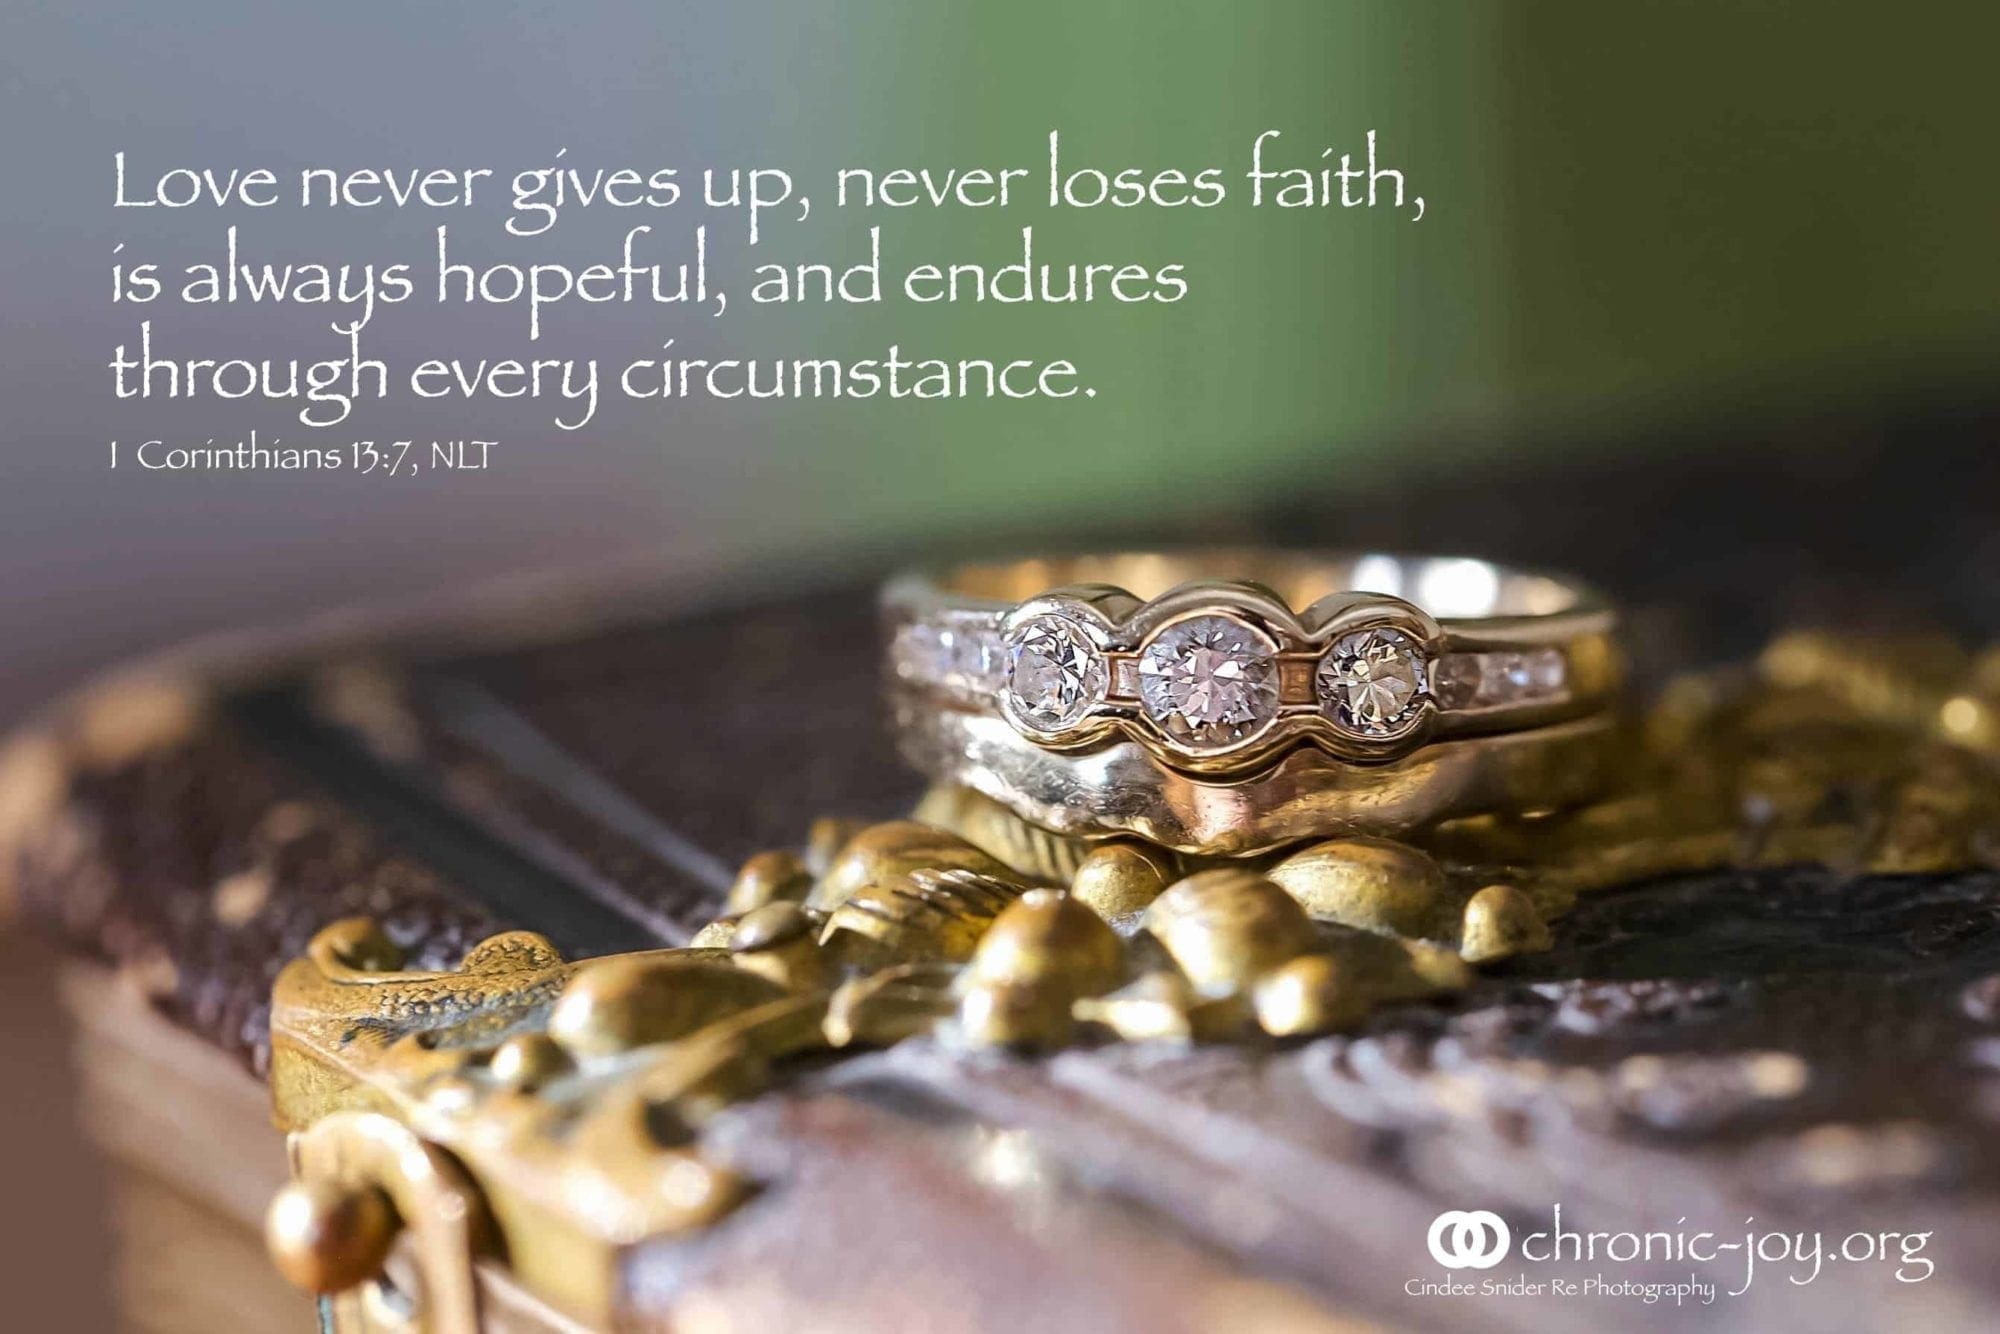 Love never gives up, never loses faith, is always hopeful, and endures through every circumstance. 1 Corinthians 13:7 NLT